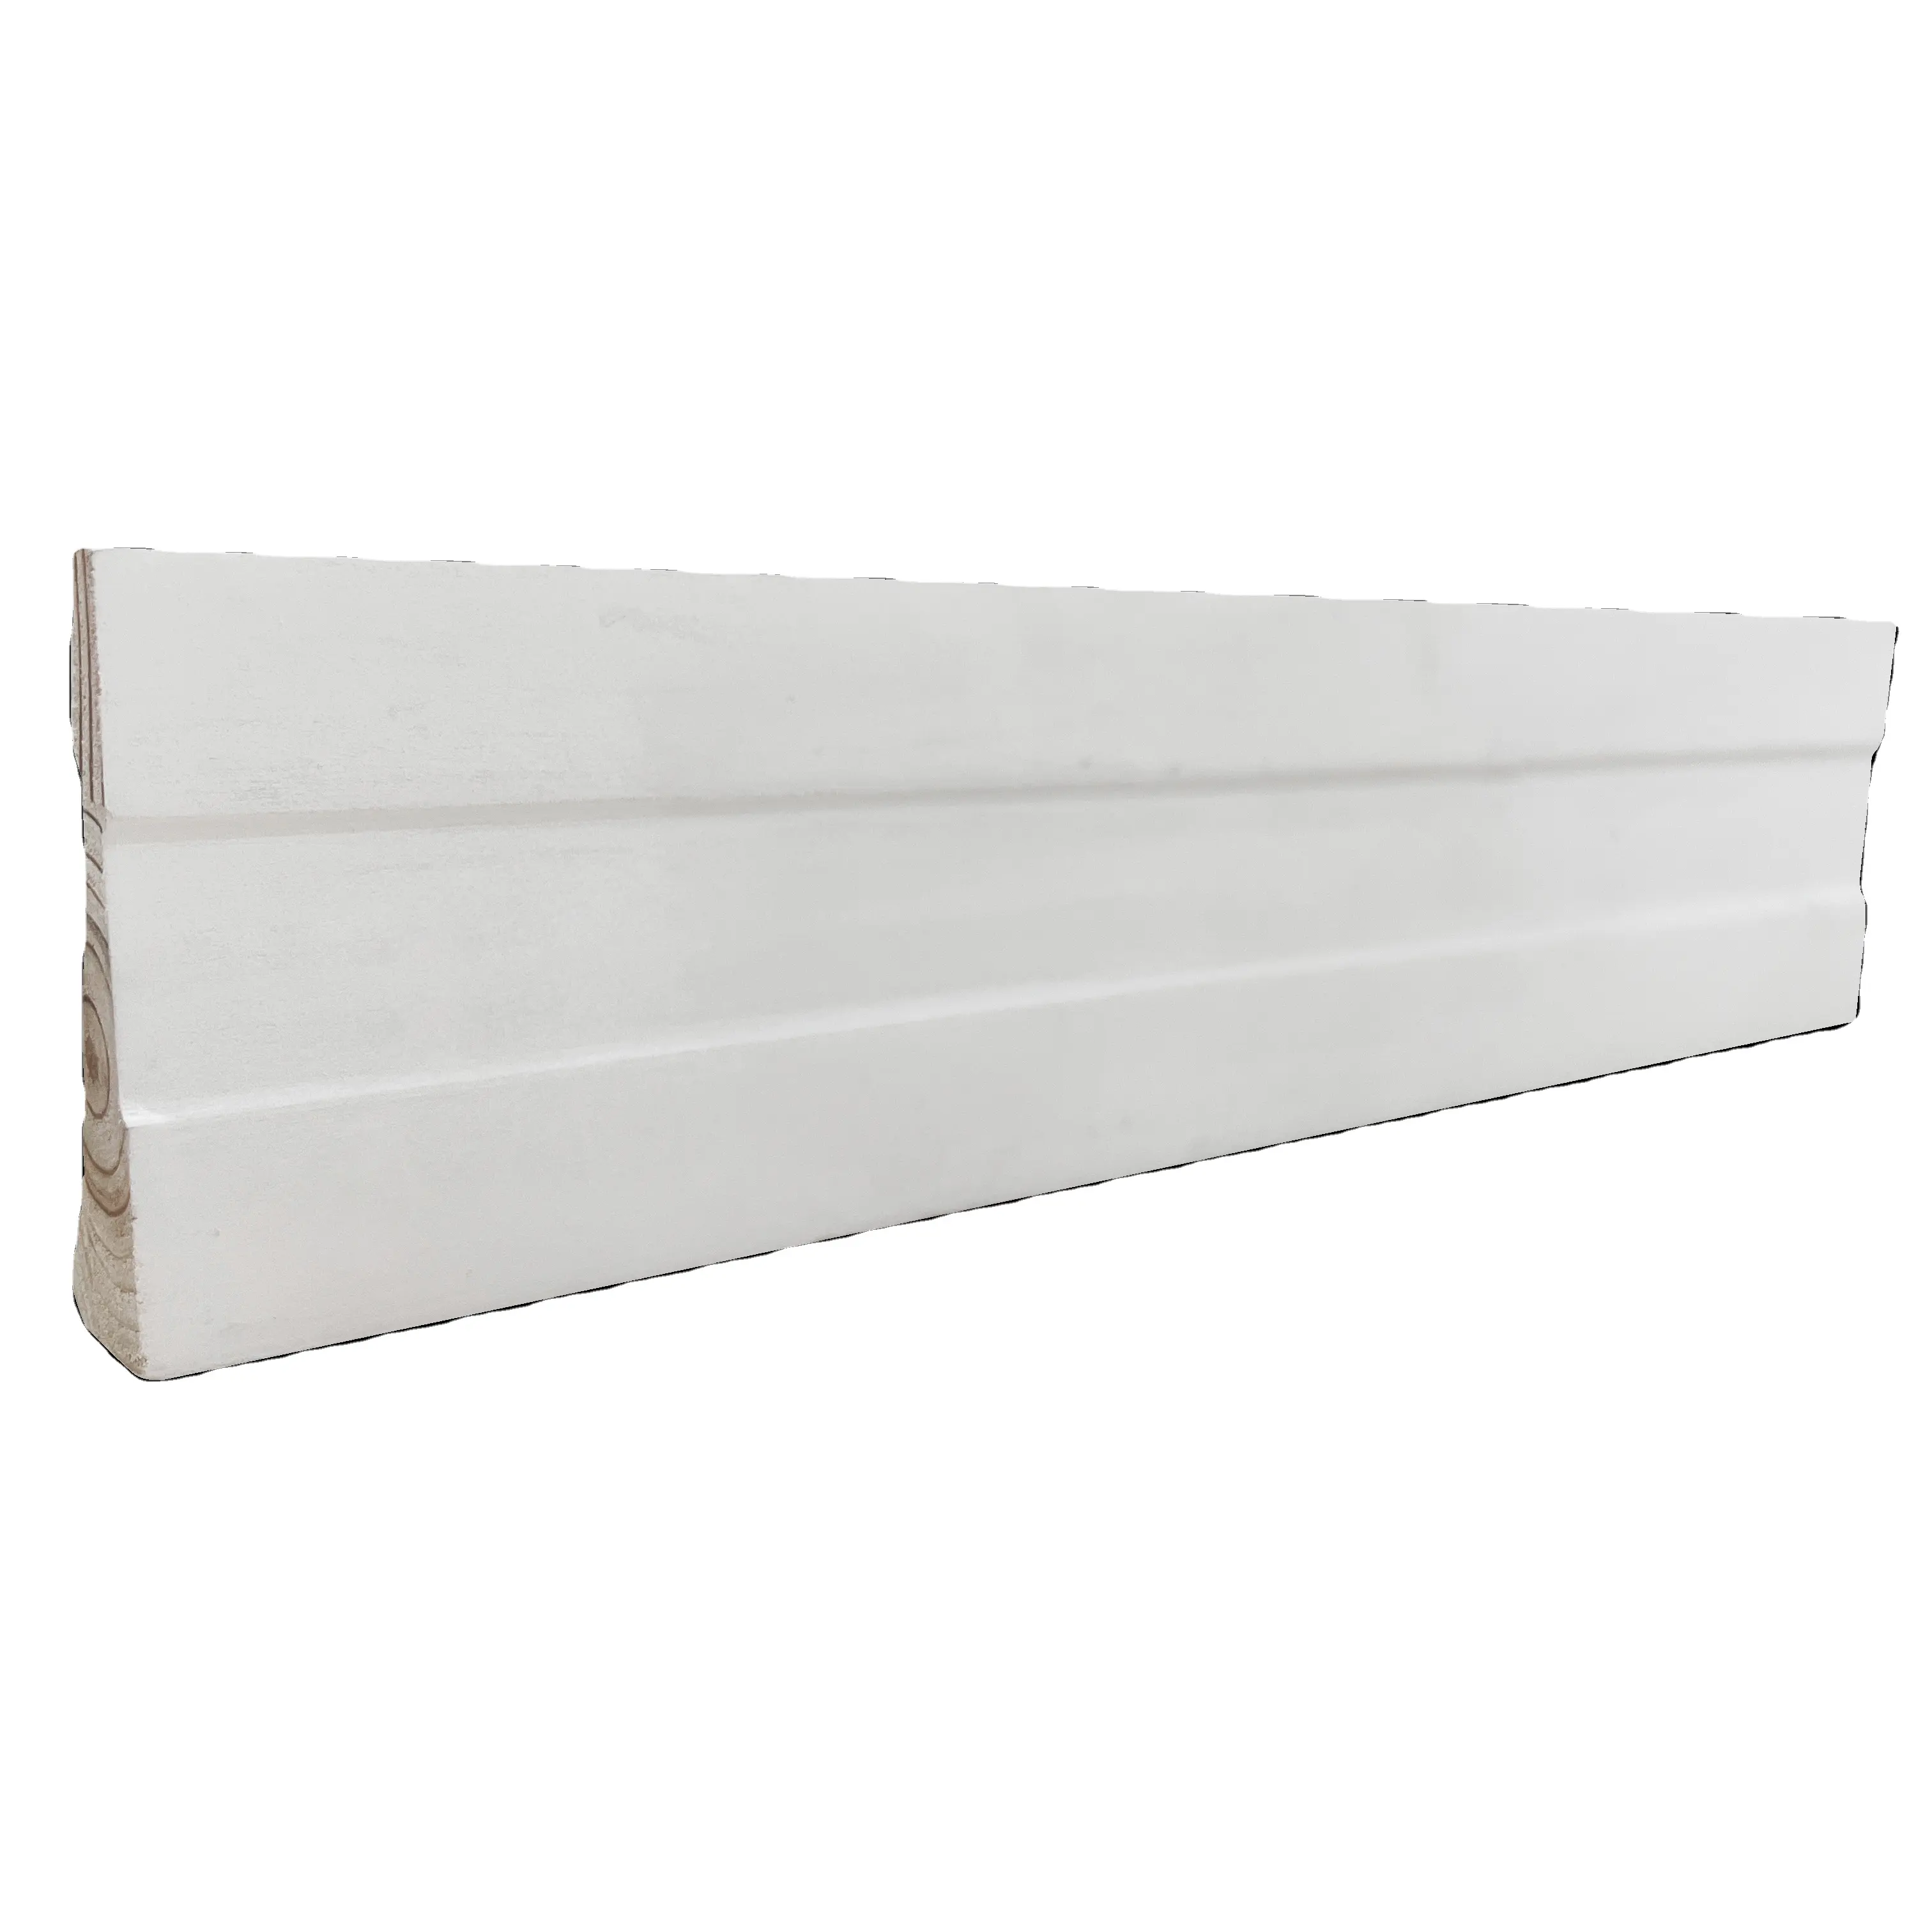 High Quality Wood Trim Decor Crown Molding Cornice Moulding Ceiling Mouldings